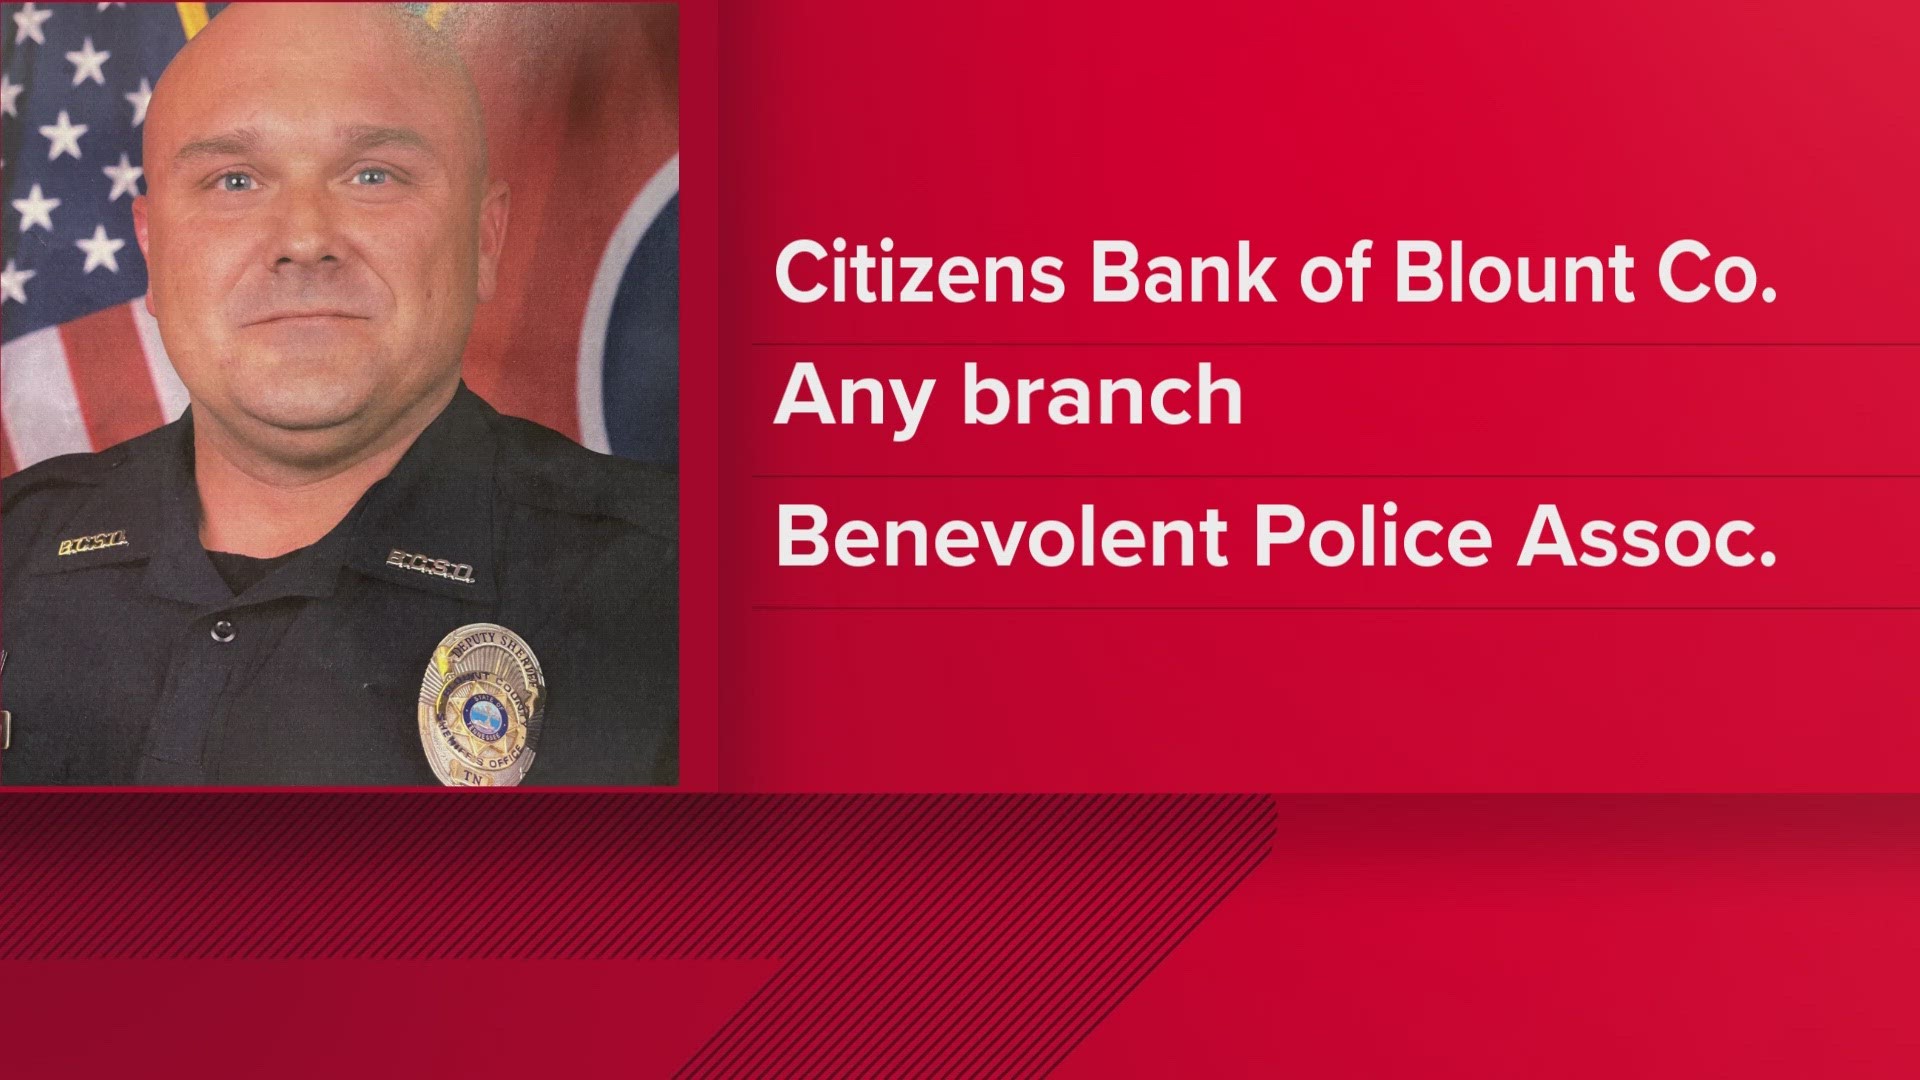 The public can donate to the fund at any Citizens Bank of Blount County branch.